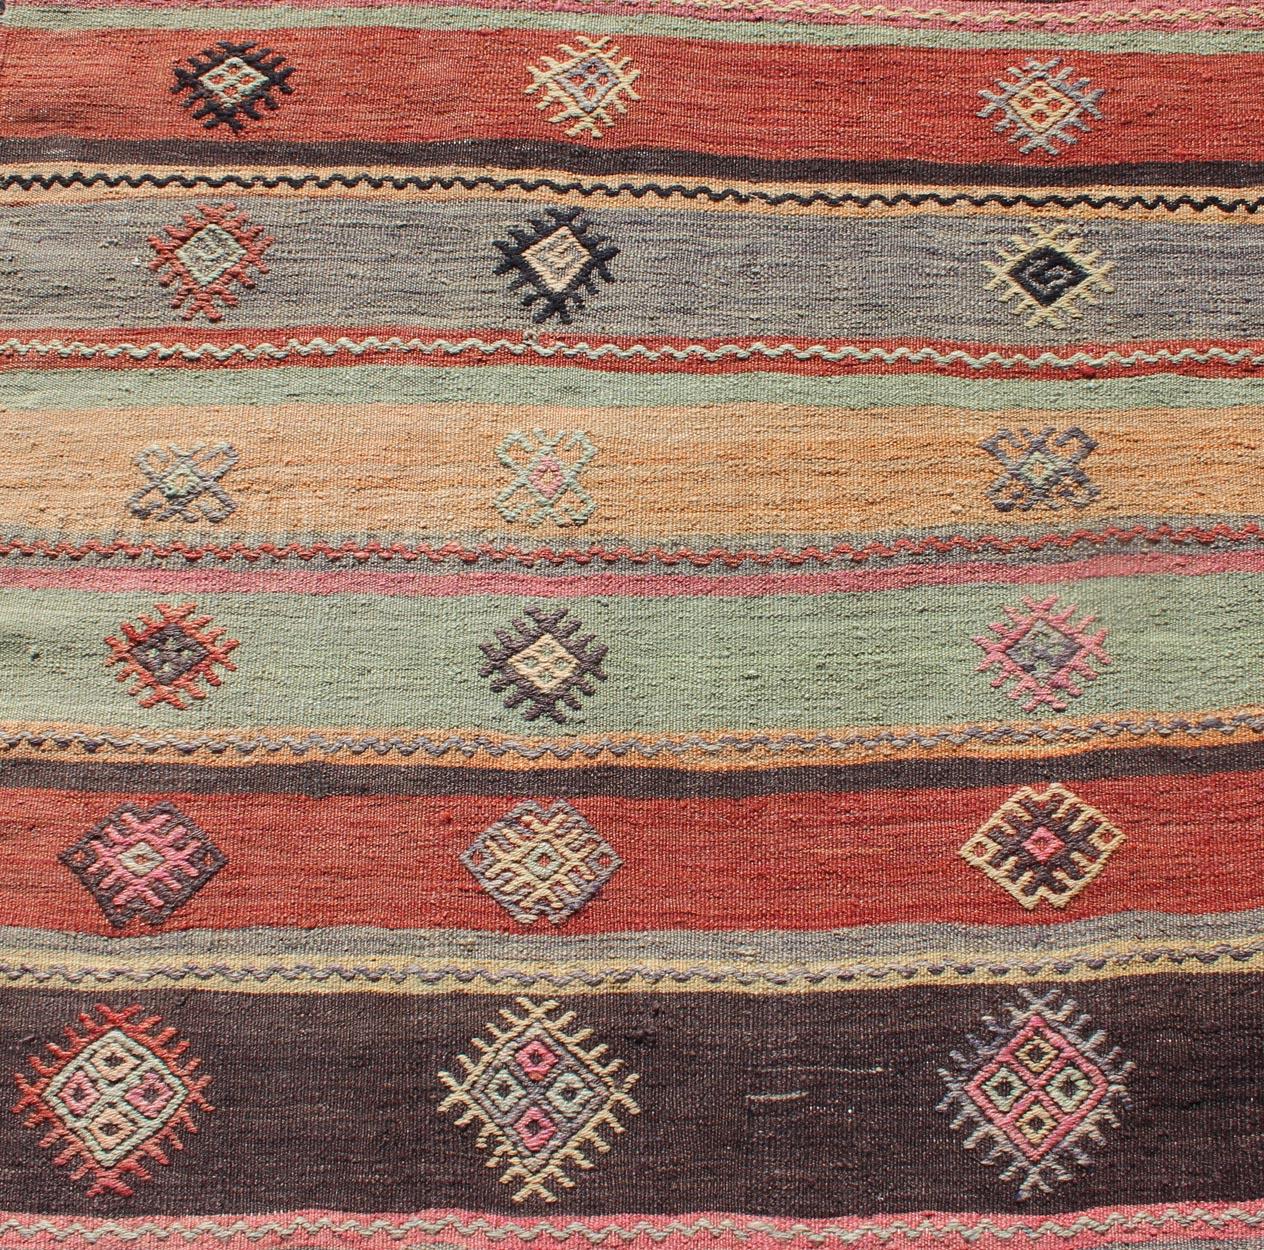 Wool Colorful Vintage Embroidered Kilim Runner with Stripe's and Geometric Prints For Sale